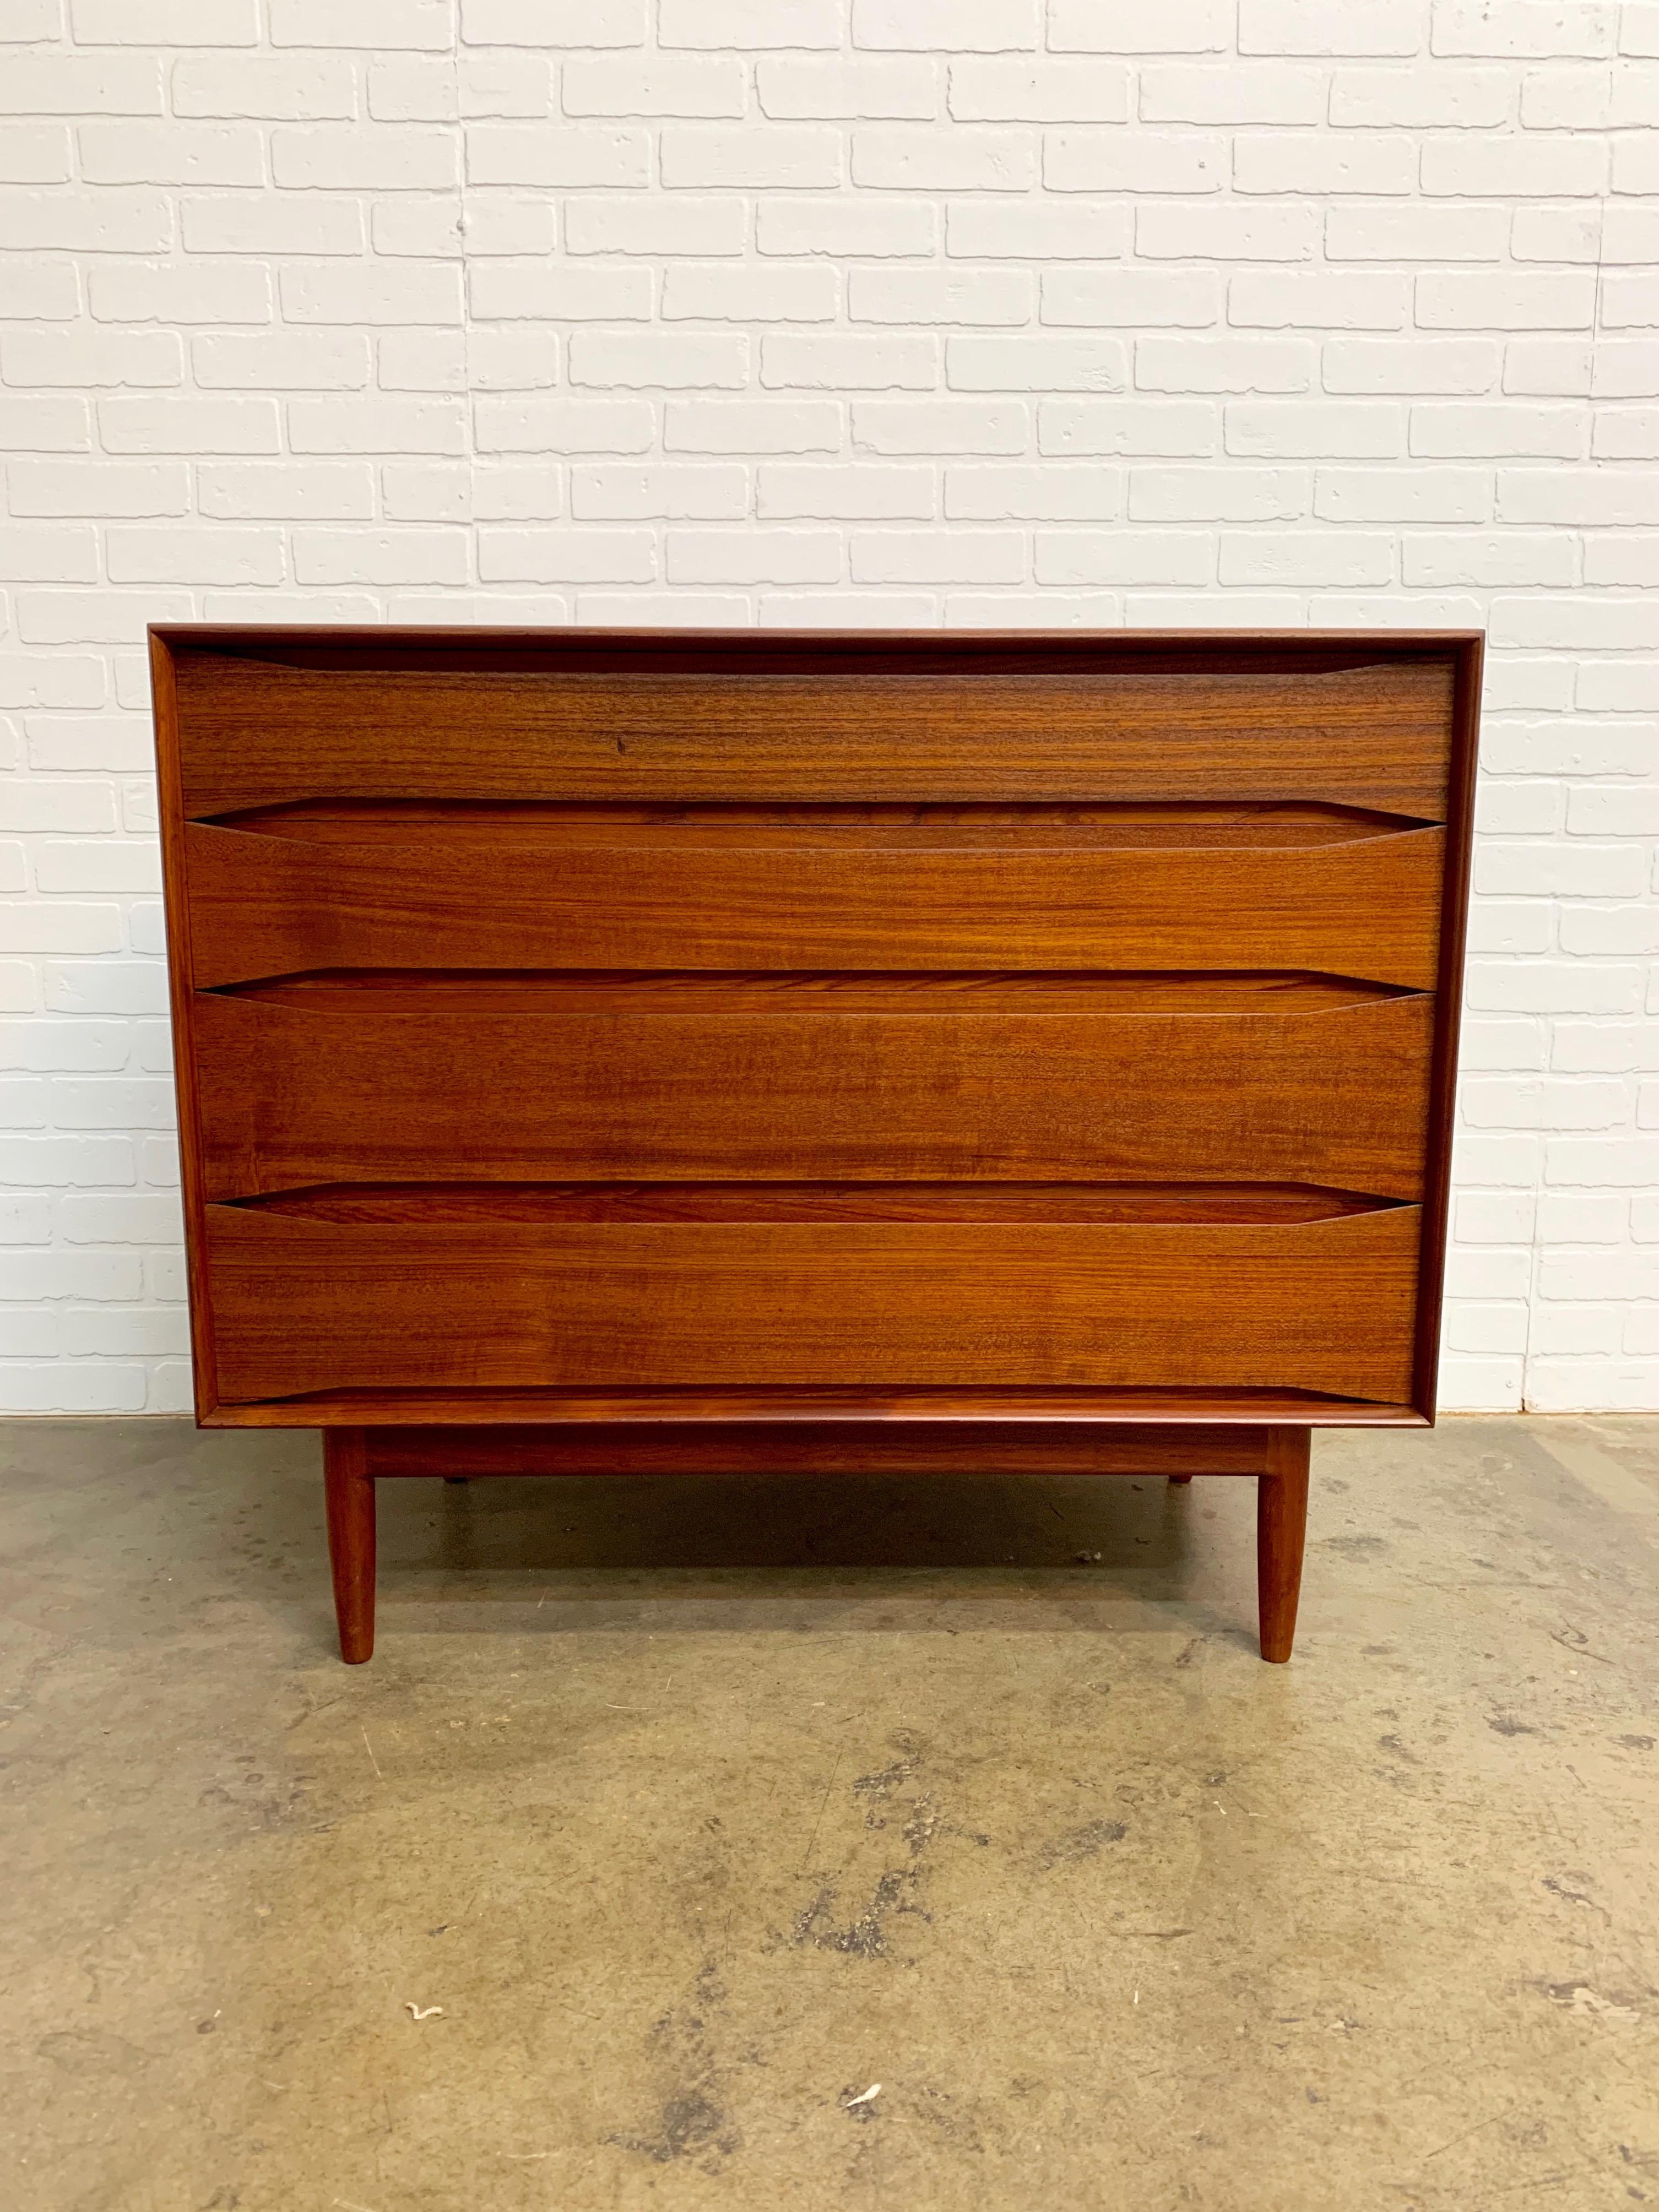 Solid teak dresser with exposed dovetail corners Designed by Johannes Aasbjerg for his company Aasbjerg & Ørtoft. Johannes Aasbjerg's Classic bullet edge case and recessed drawer pulls. Model EX-243 four-drawer dresser with a handcut dovetailed case